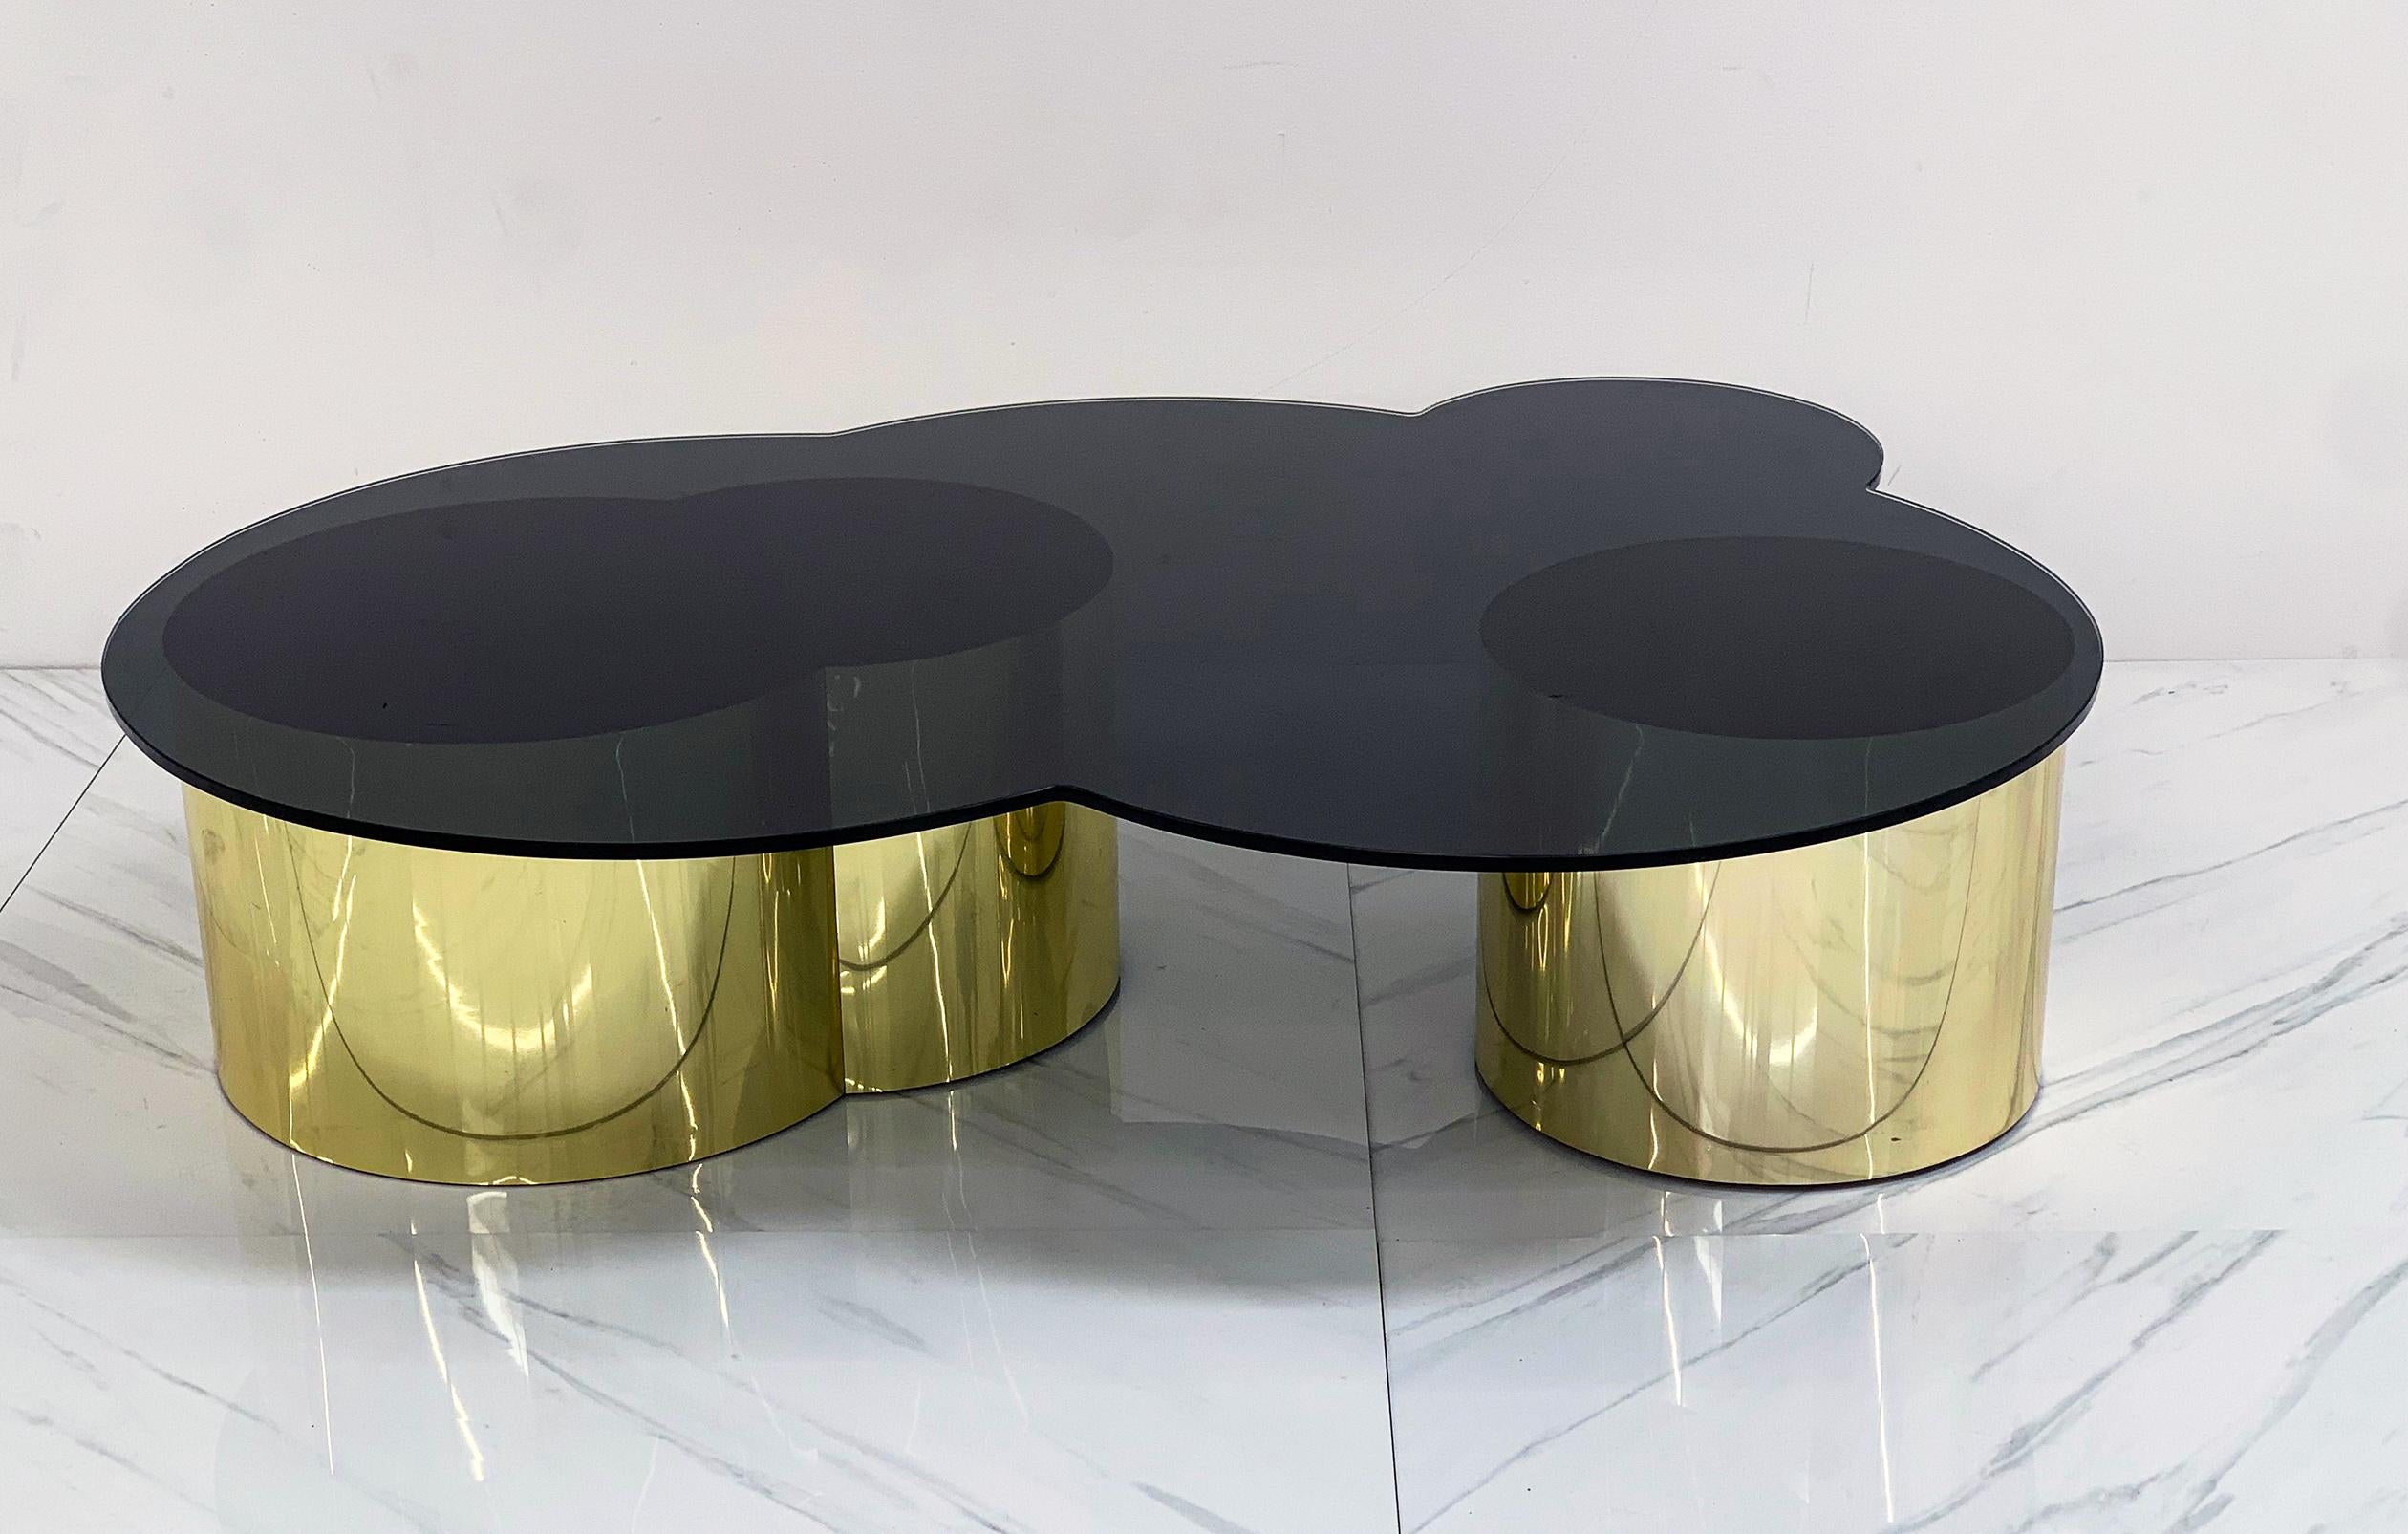 Free Form Biomorphic Brass and Glass Coffee Table, 1970's For Sale 1